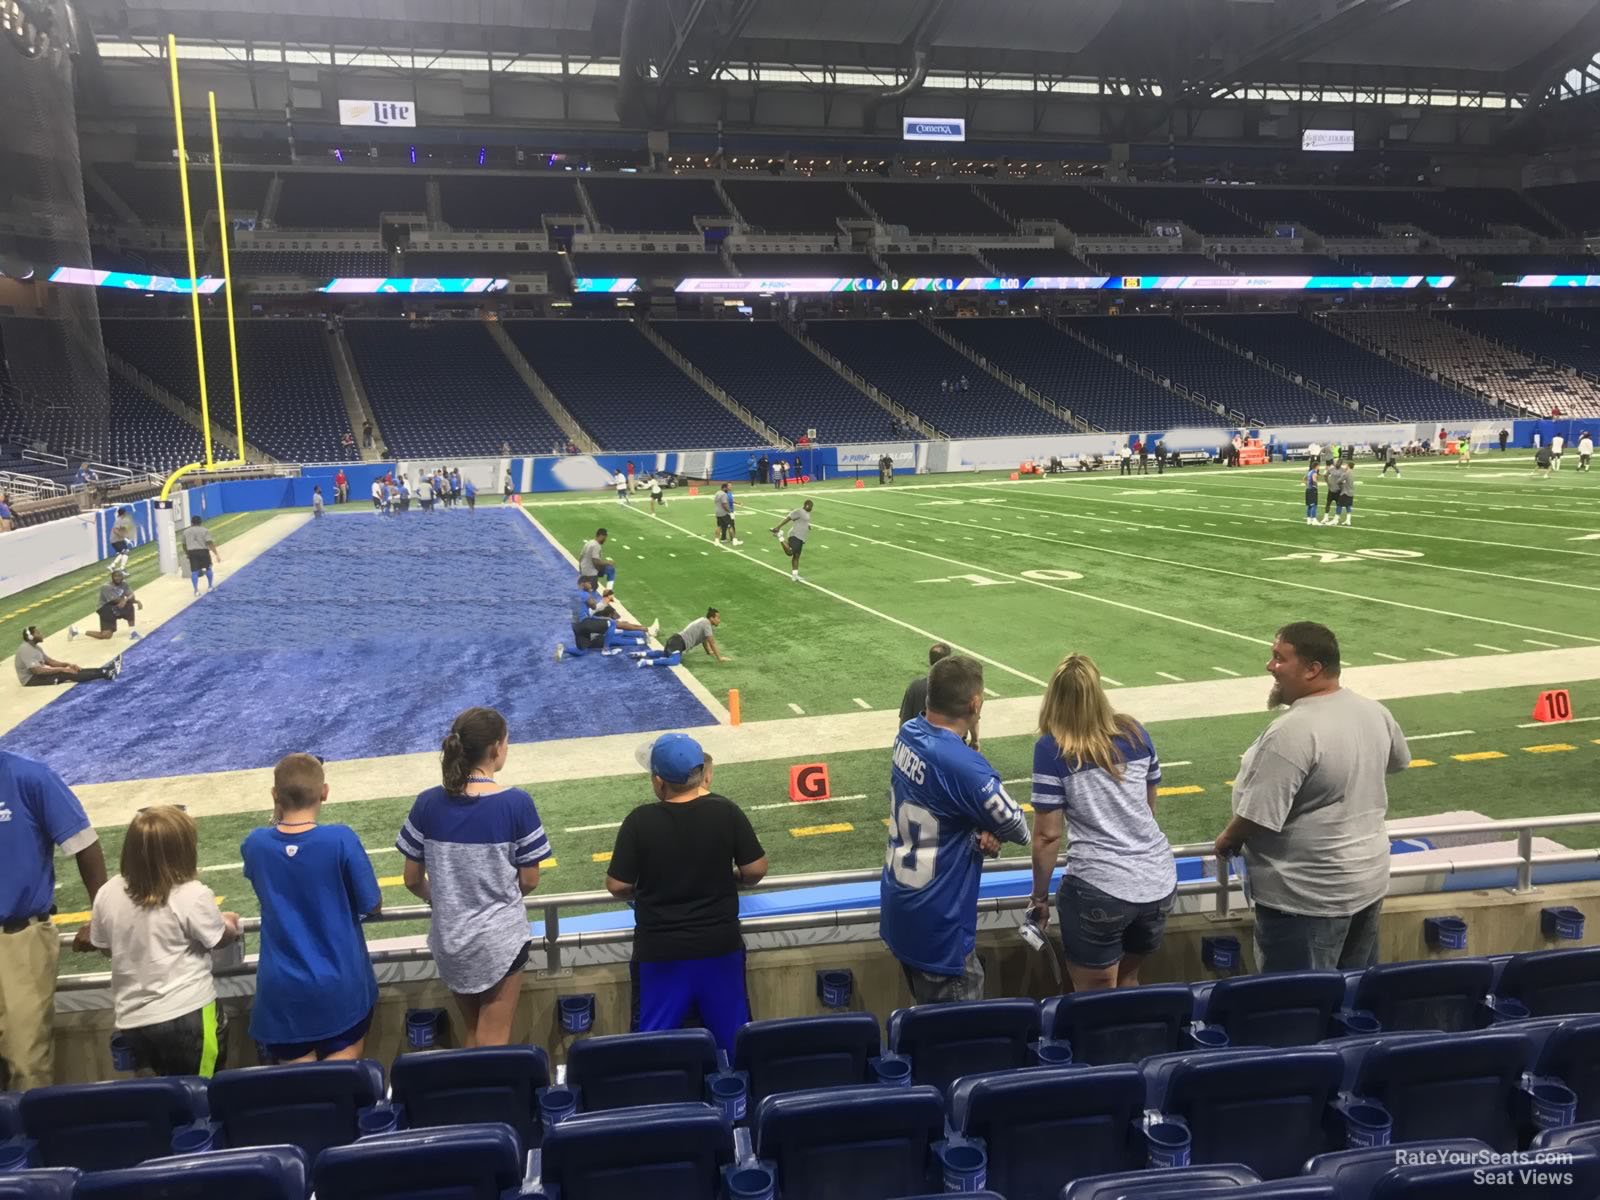 Section 102 at Ford Field